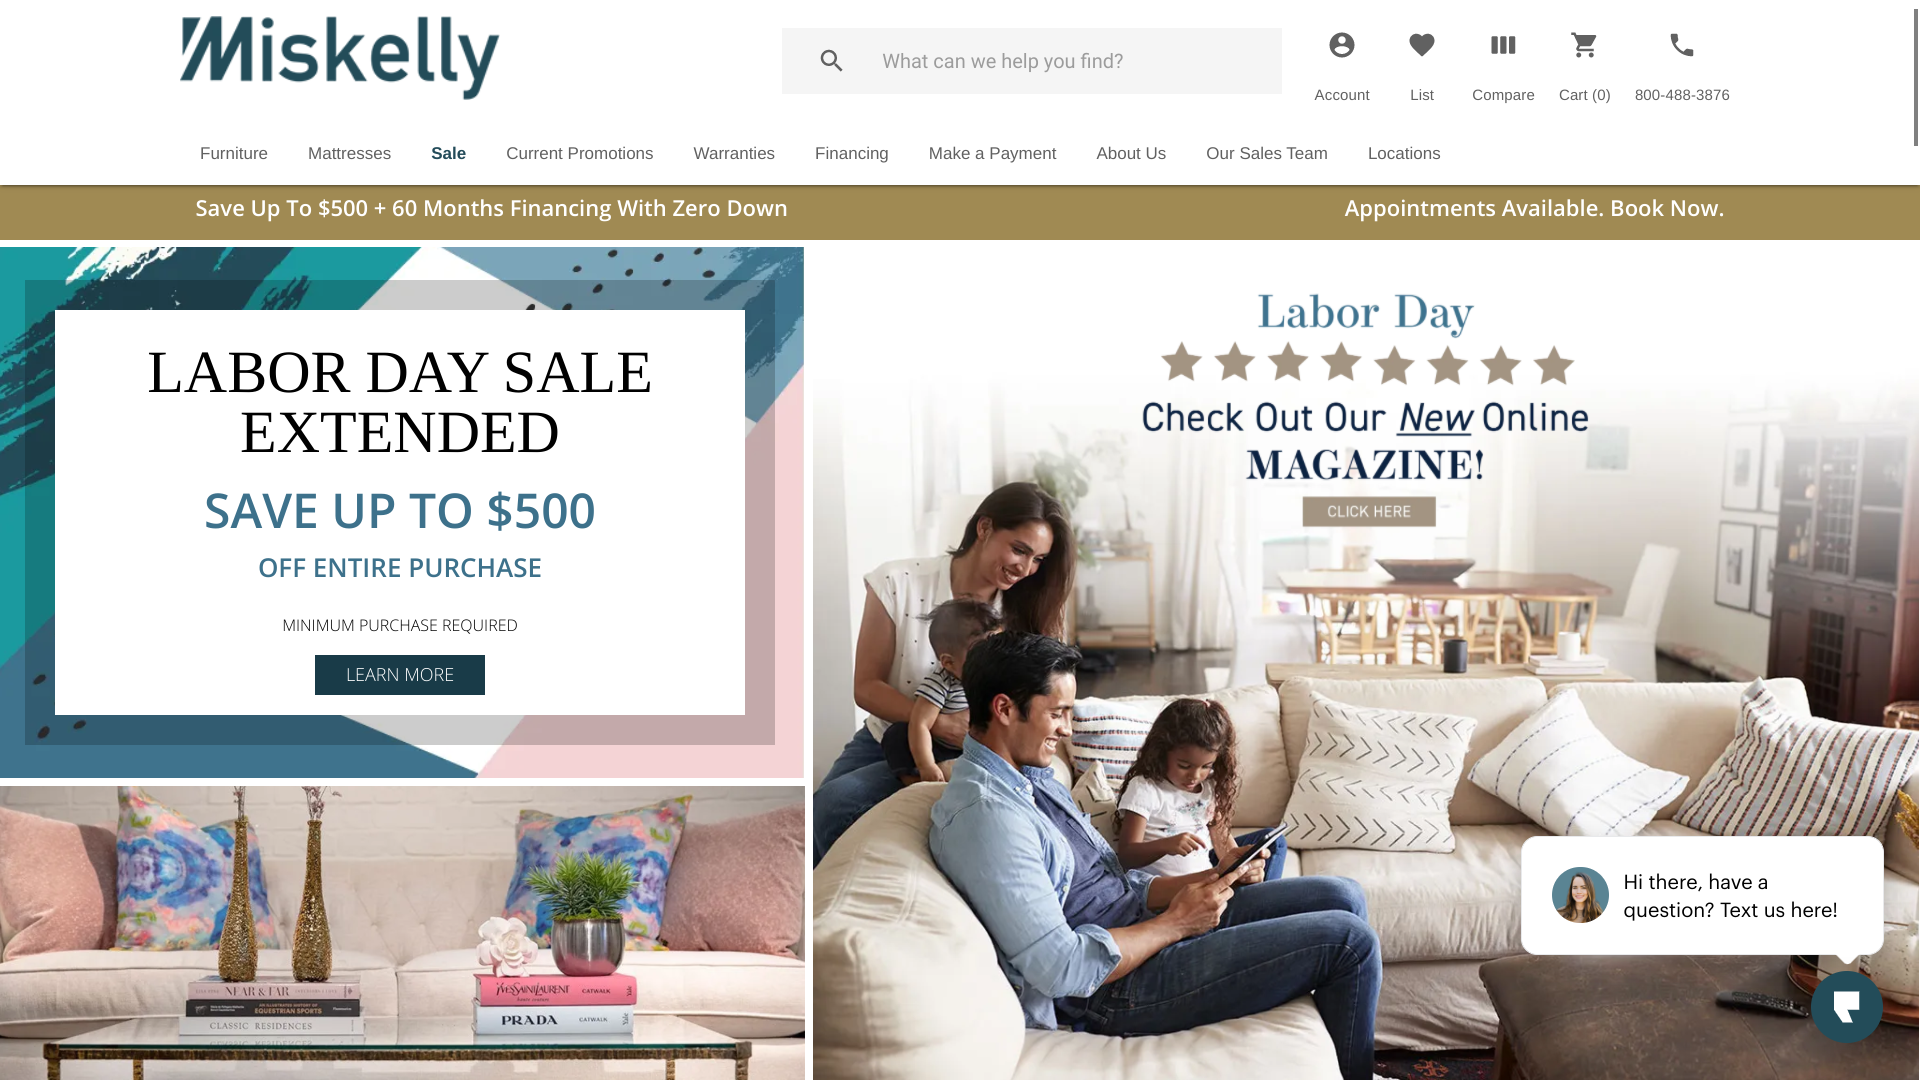 Miskelly Furniture offered tiered savings (the more you spend, the more you save) and extended the offer to eliminate overcrowding.